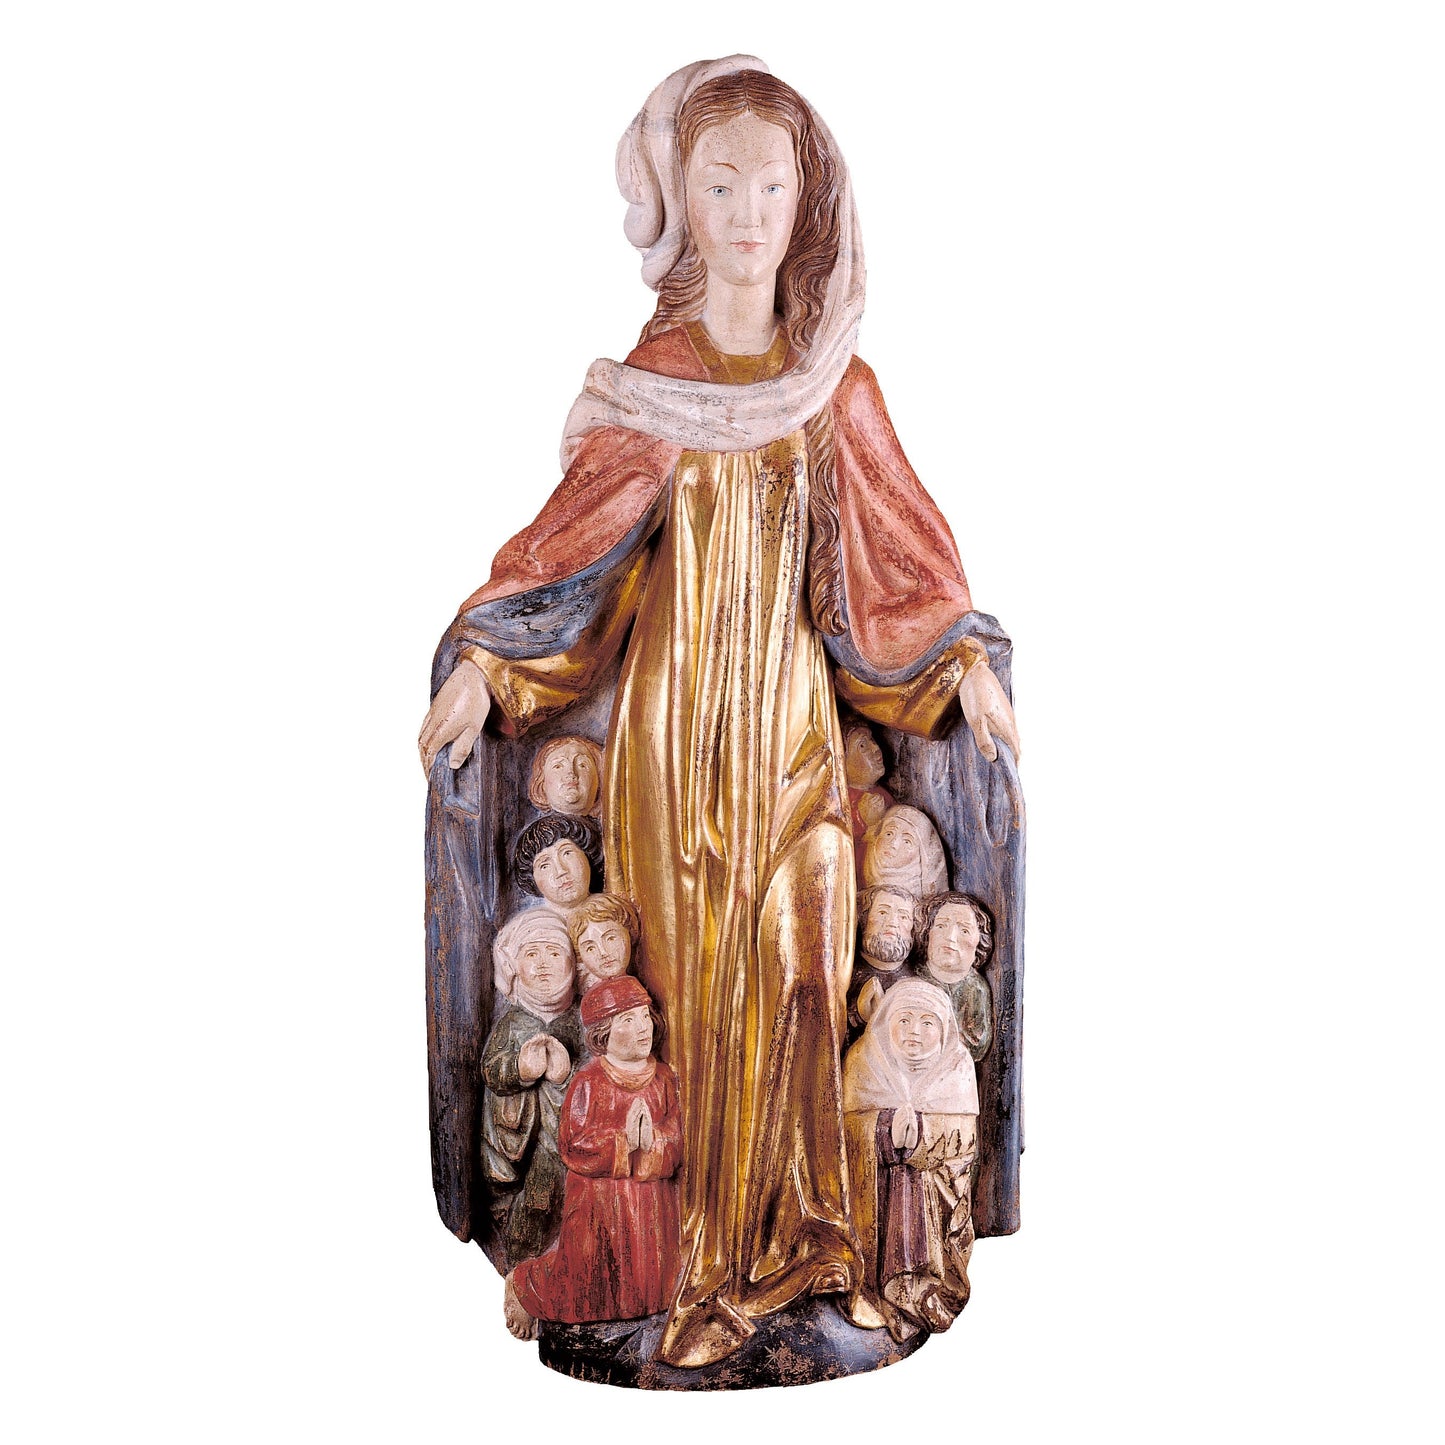 MONDO CATTOLICO Golden / 35 cm (13.8 in) Wooden statue of Madonna of protective cloak